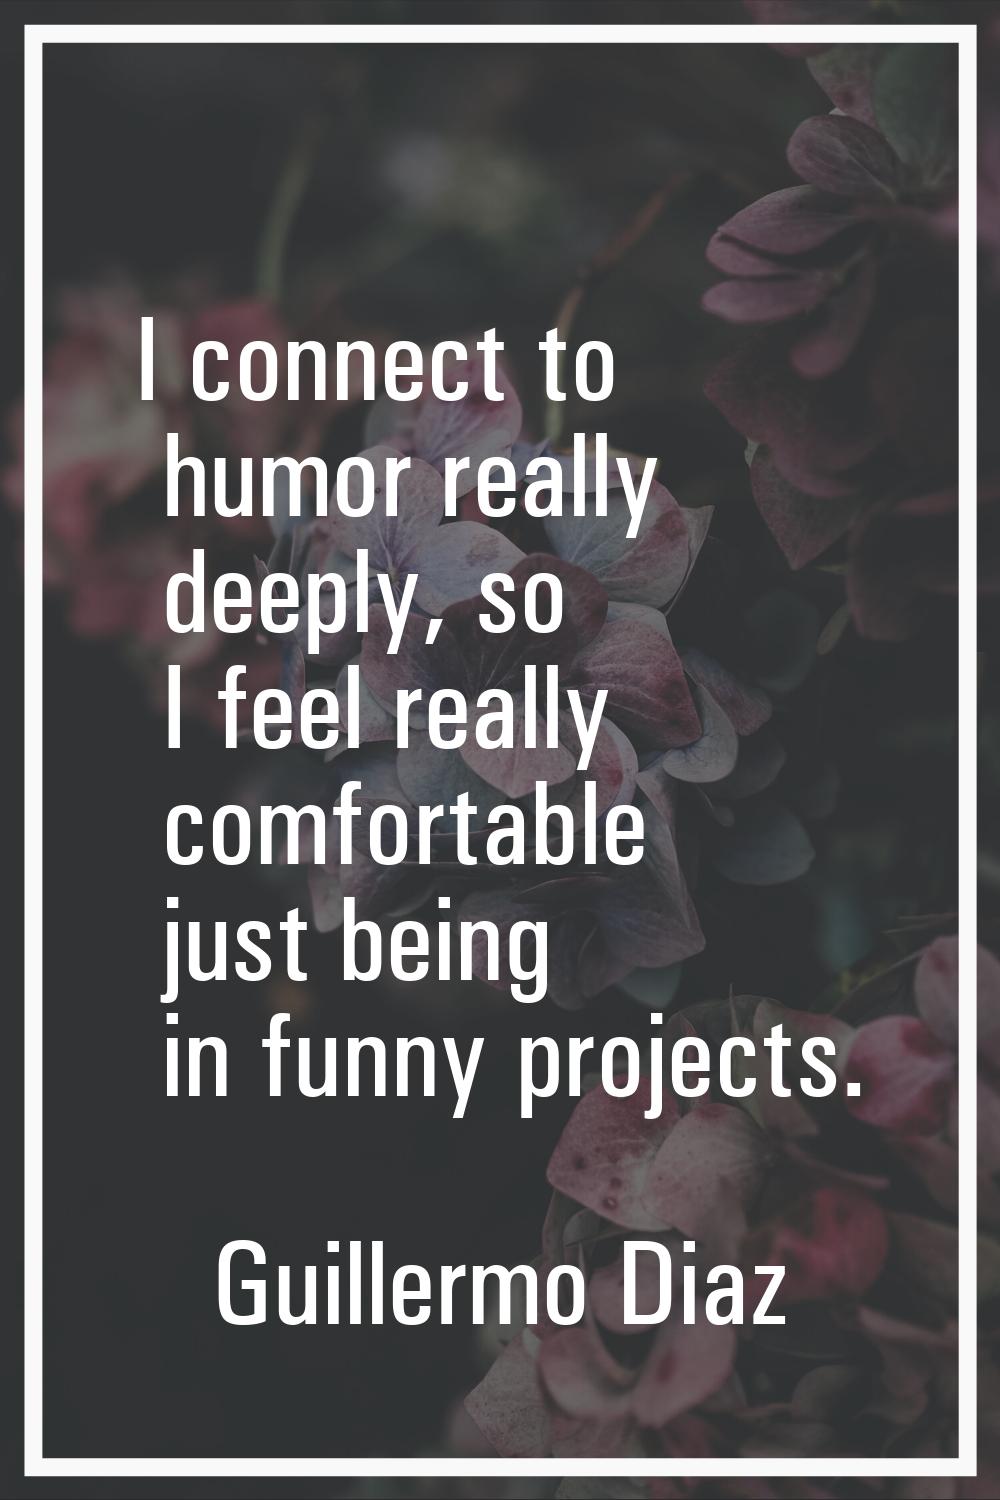 I connect to humor really deeply, so I feel really comfortable just being in funny projects.